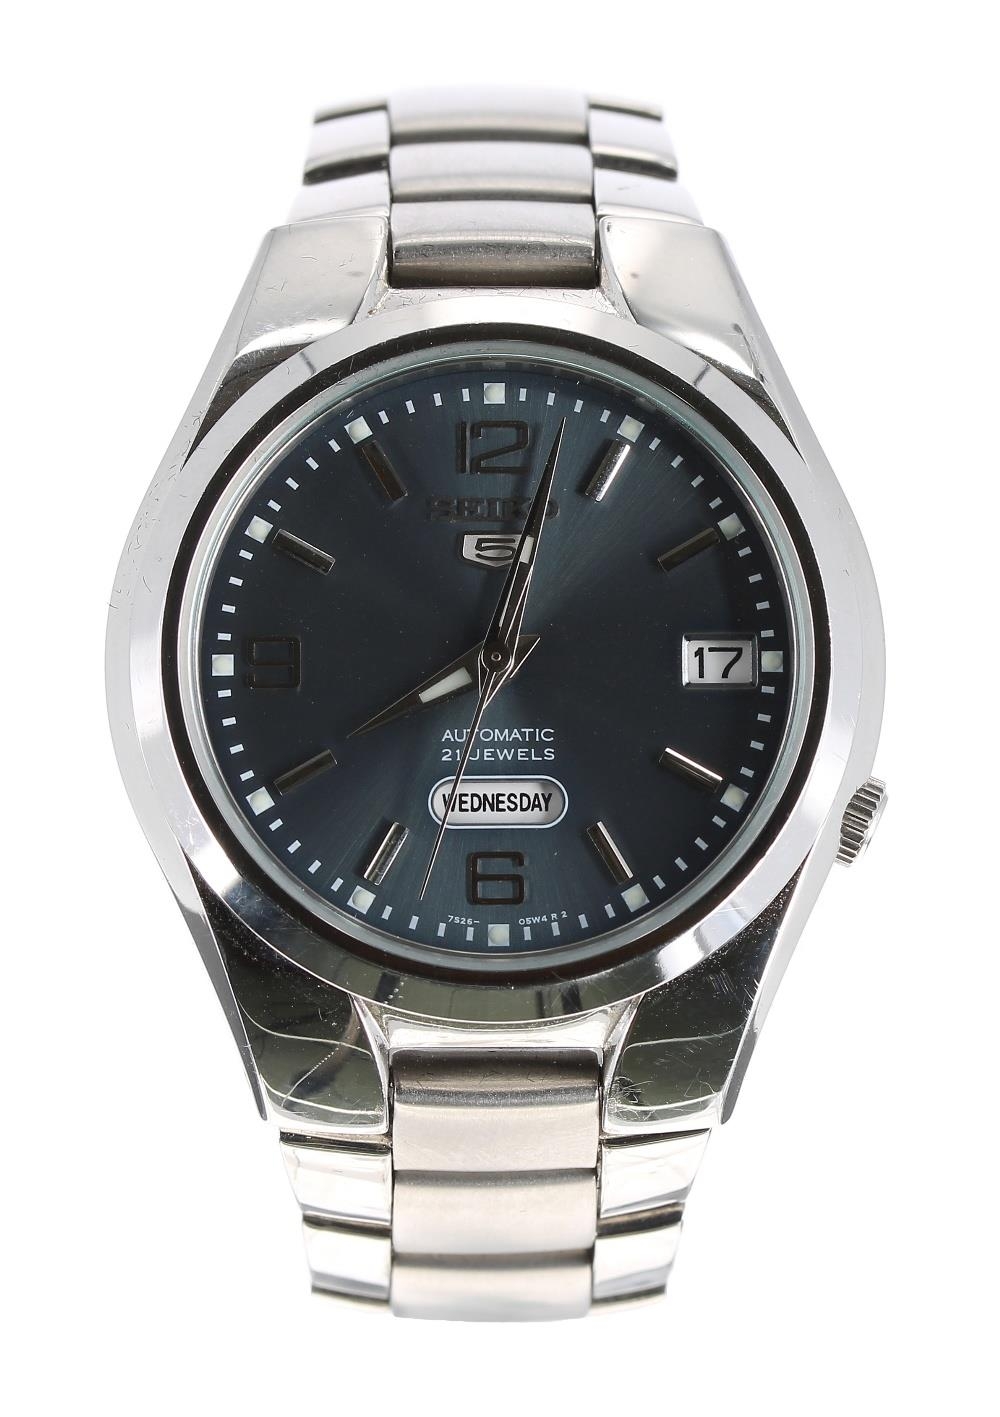 Seiko 5 automatic day/date stainless steel gentleman's bracelet watch ...